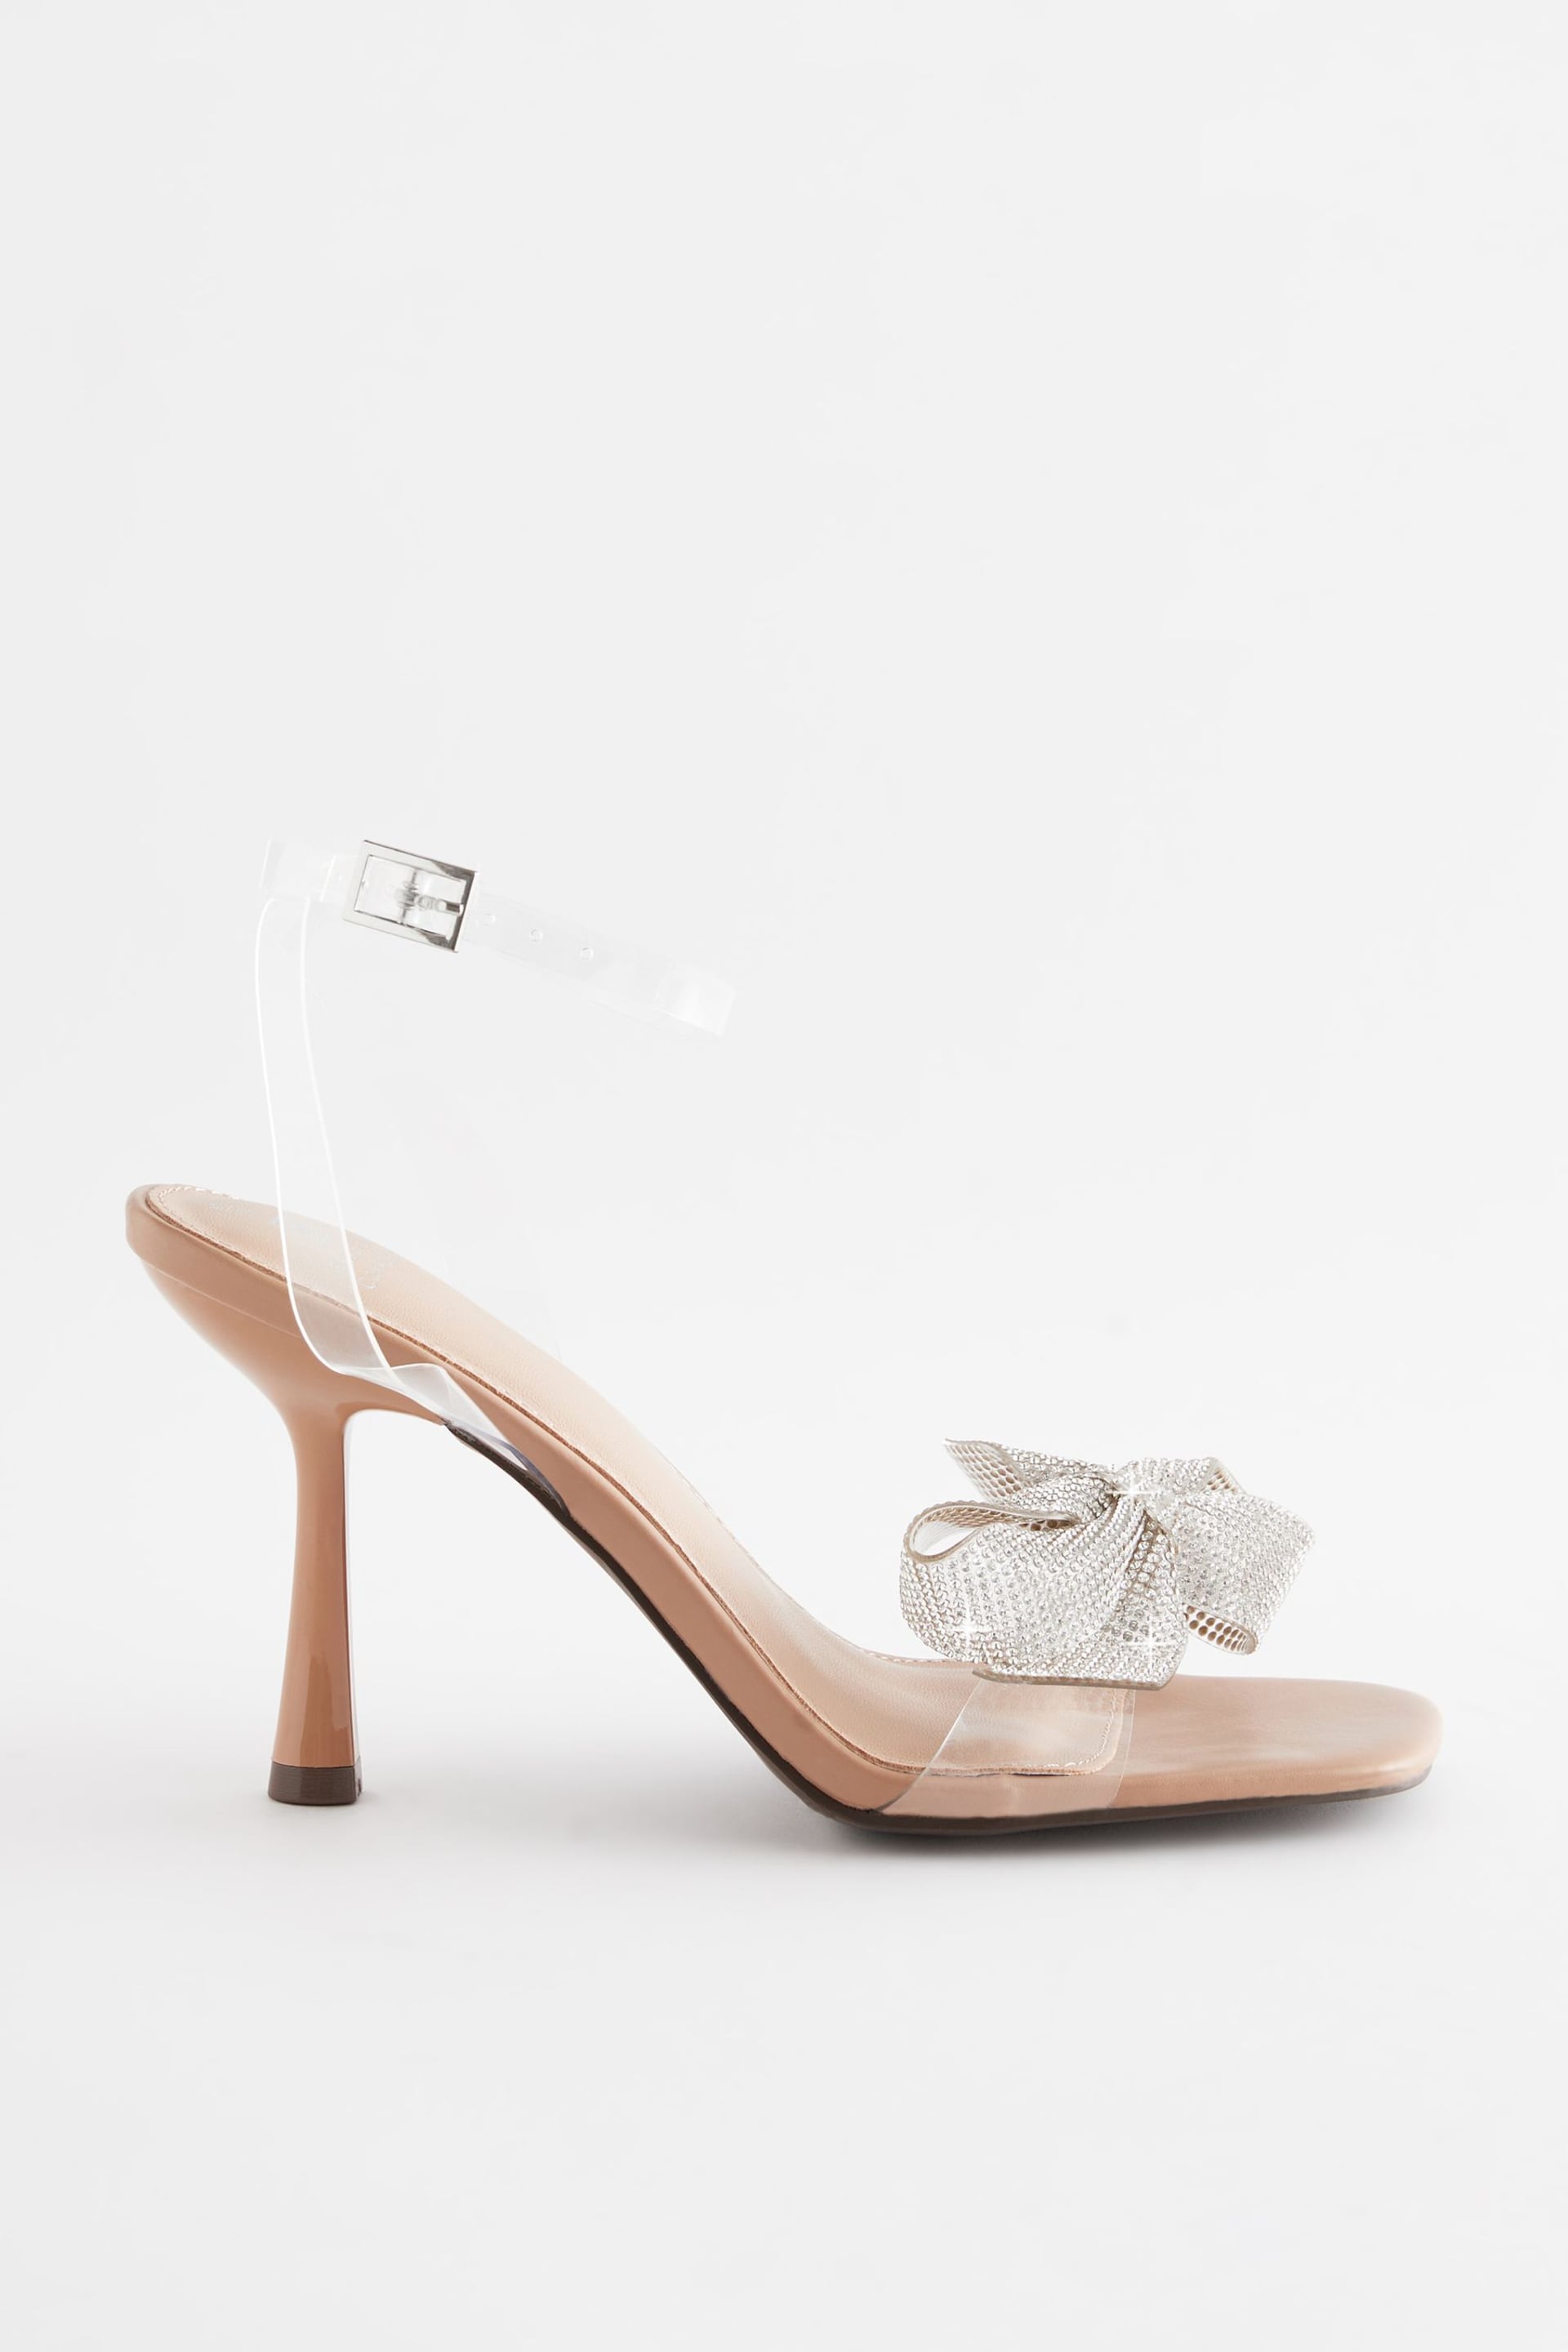 Clear Forever Comfort Vinyl Jewel Bow Sandals - Image 3 of 6